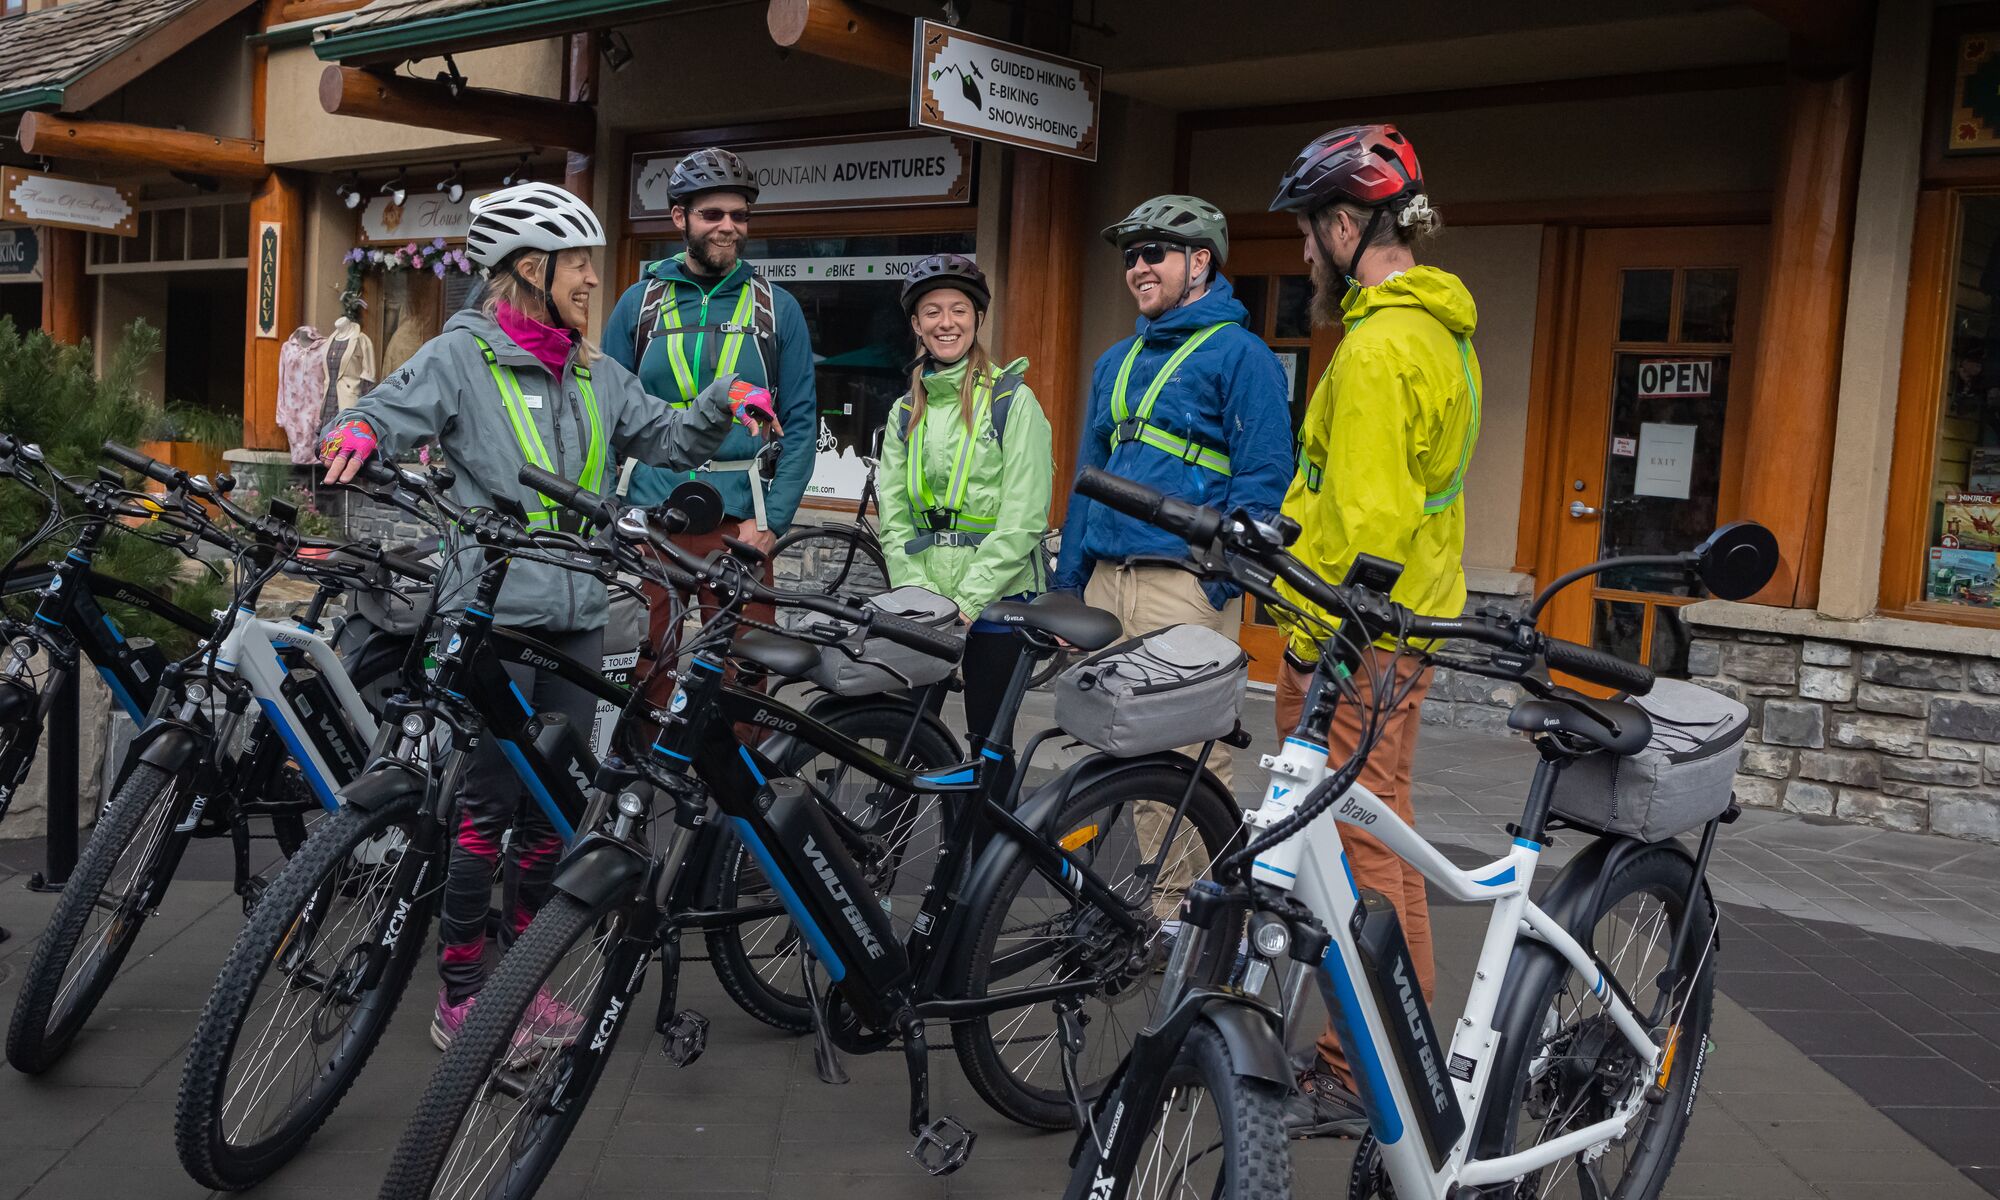 A group waits for a guided e-bike tour to start in Banff National Park.